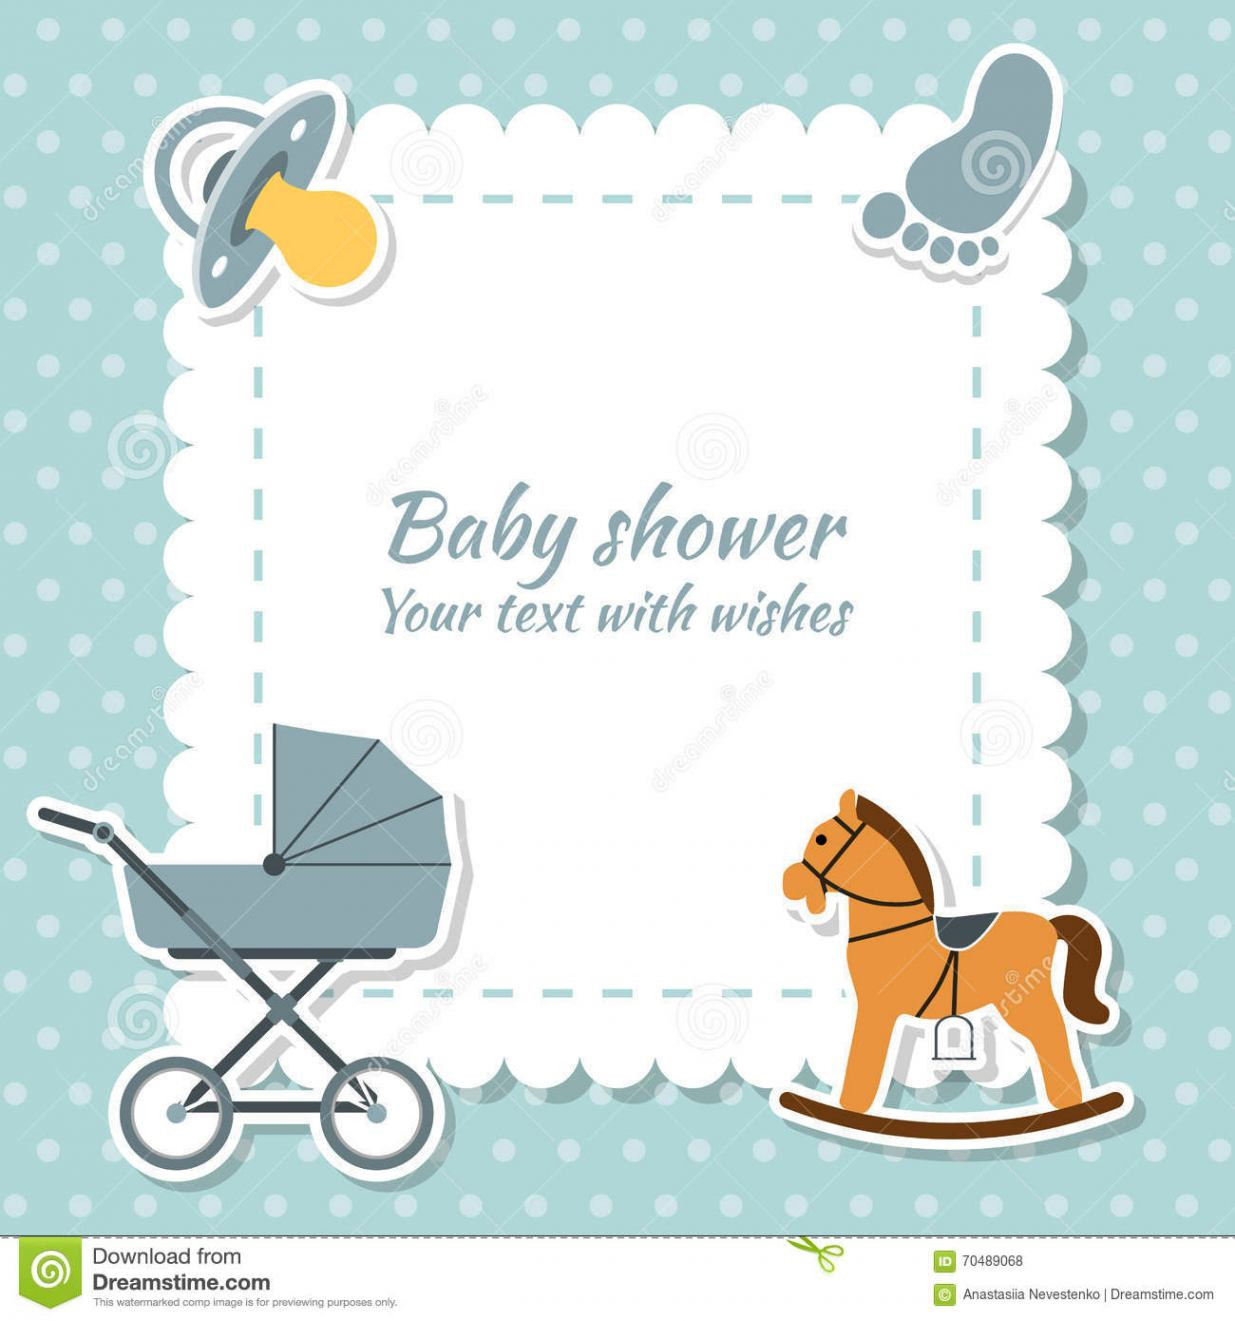 Full Size of Baby Shower:stylish Baby Shower Wishes Picture Inspirations Baby Shower Wishes Coed Baby Shower Baby Shower Goodie Bags Baby Shower Video Baby Shower Bingo Diy Baby Shower Invitations Baby Shower Gift Ideas